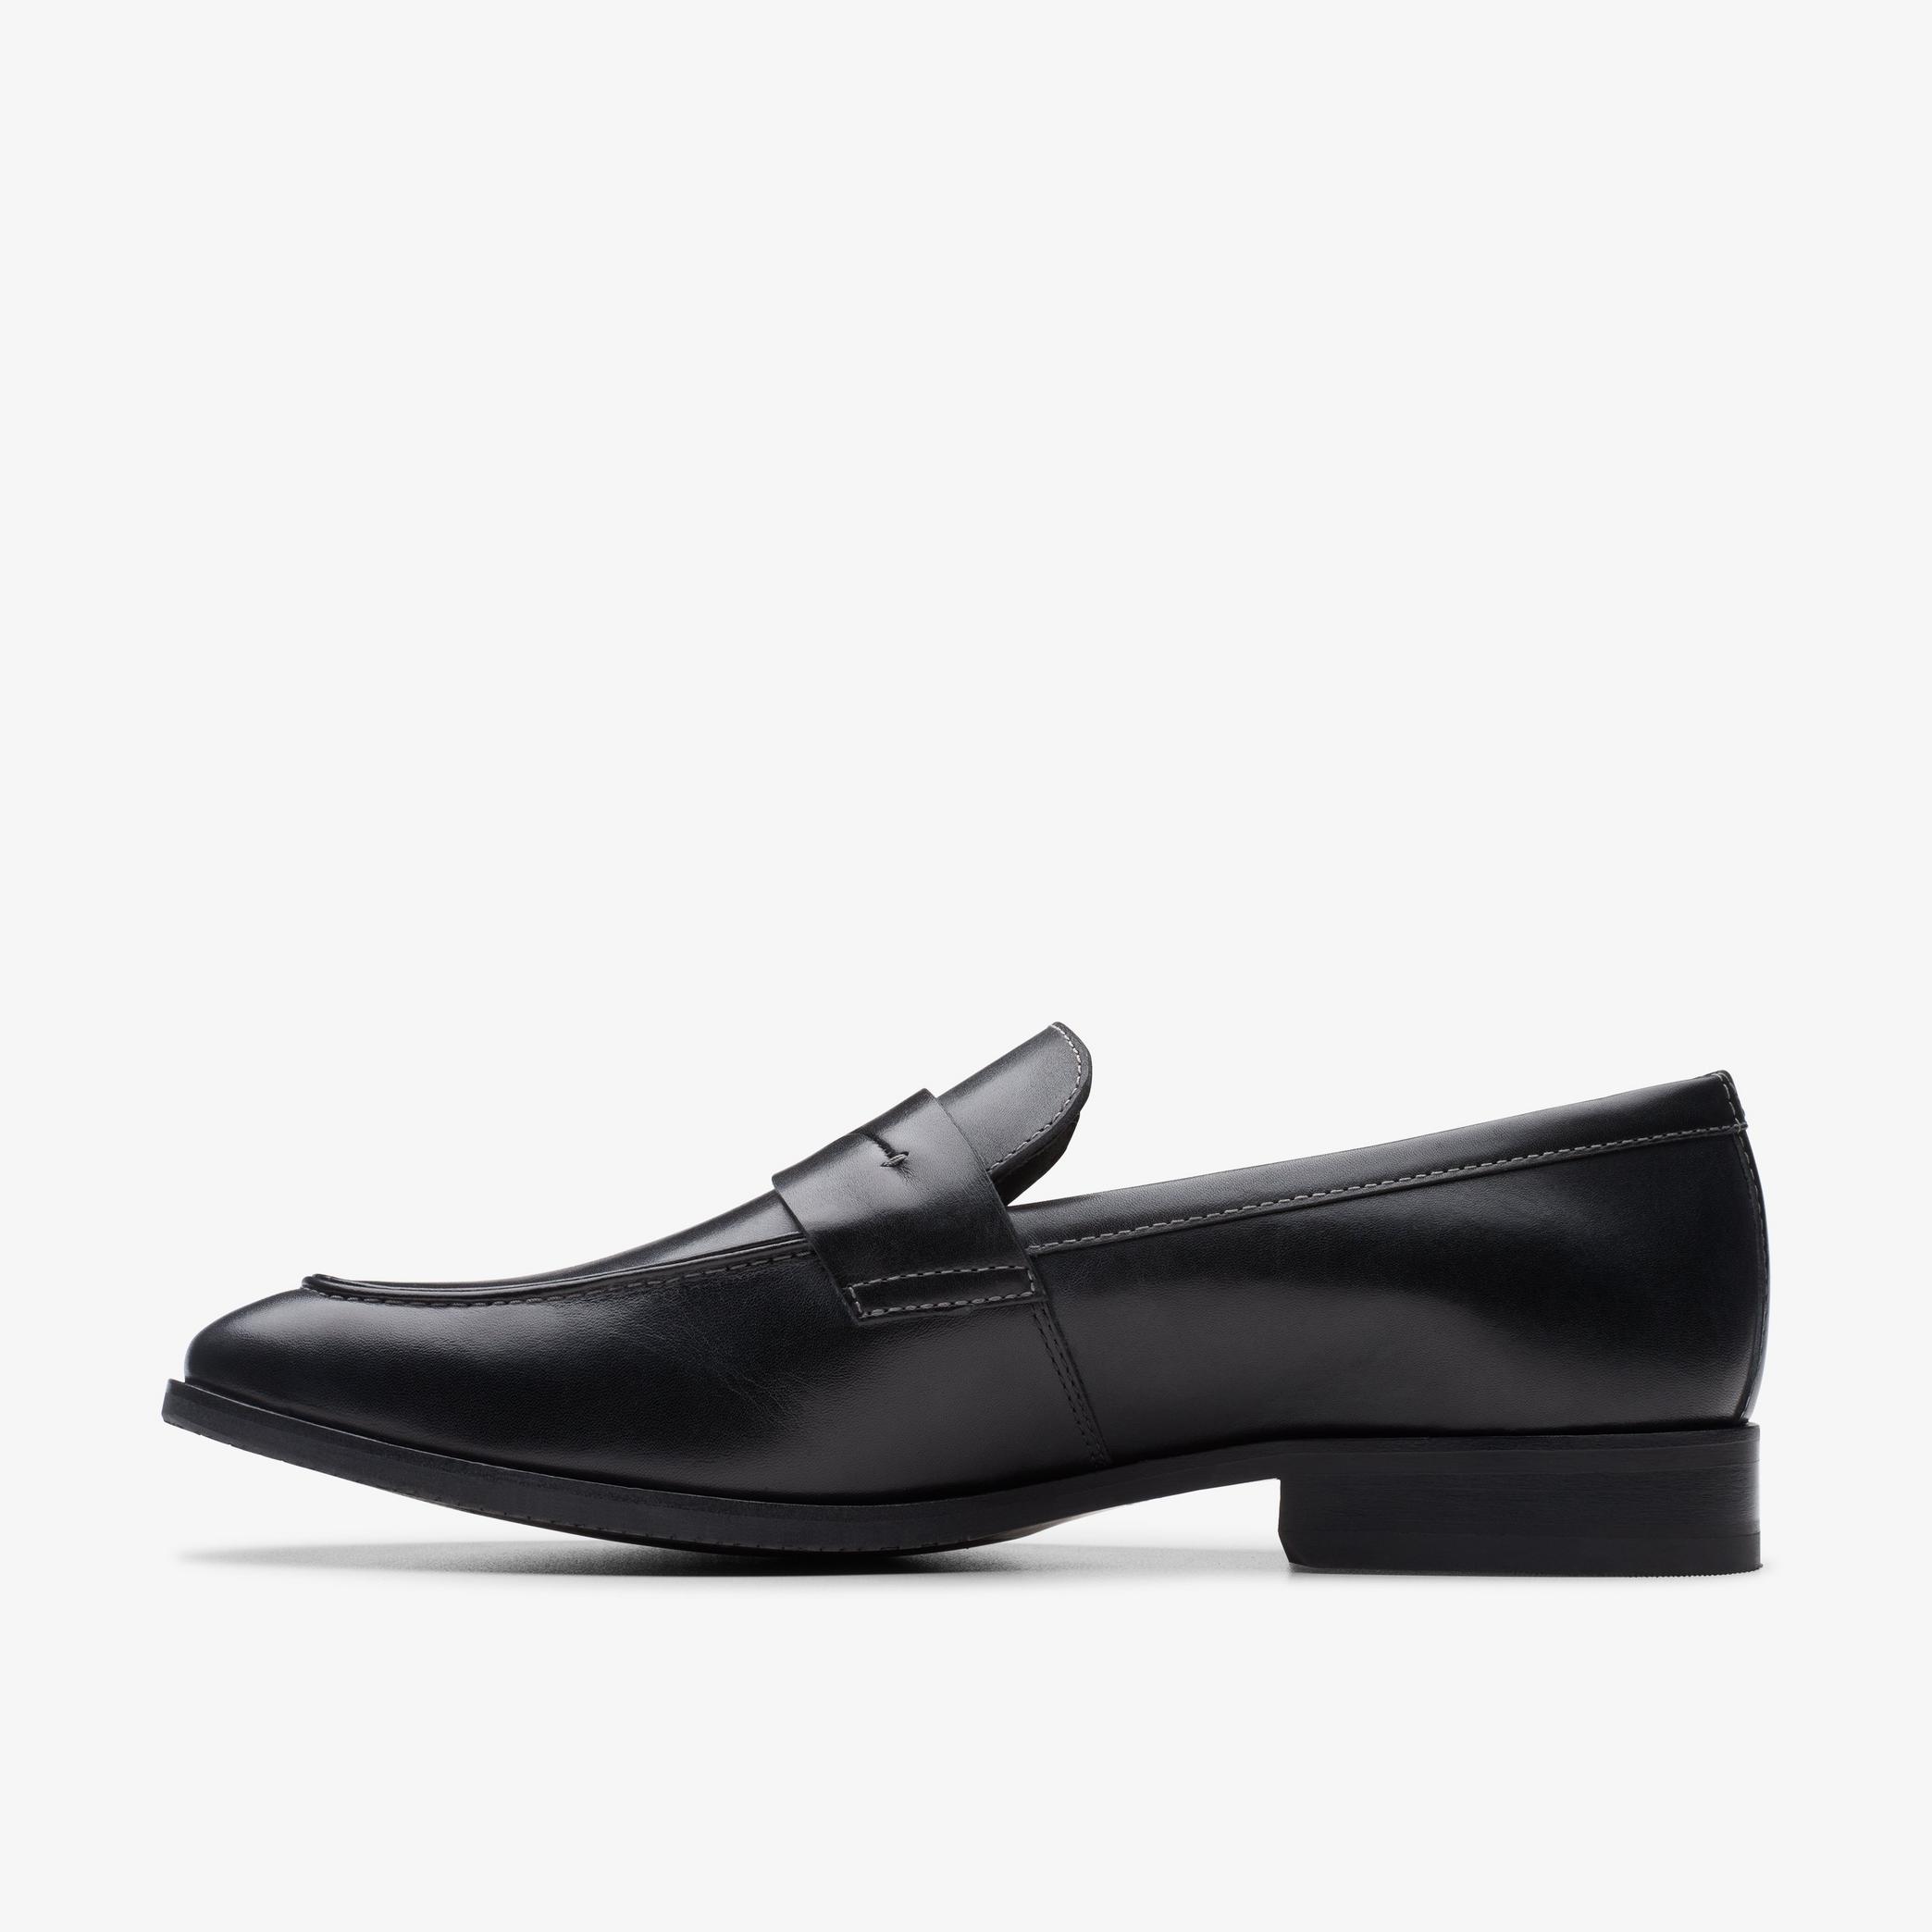 Craft Clifton Up Black Loafers, view 2 of 7